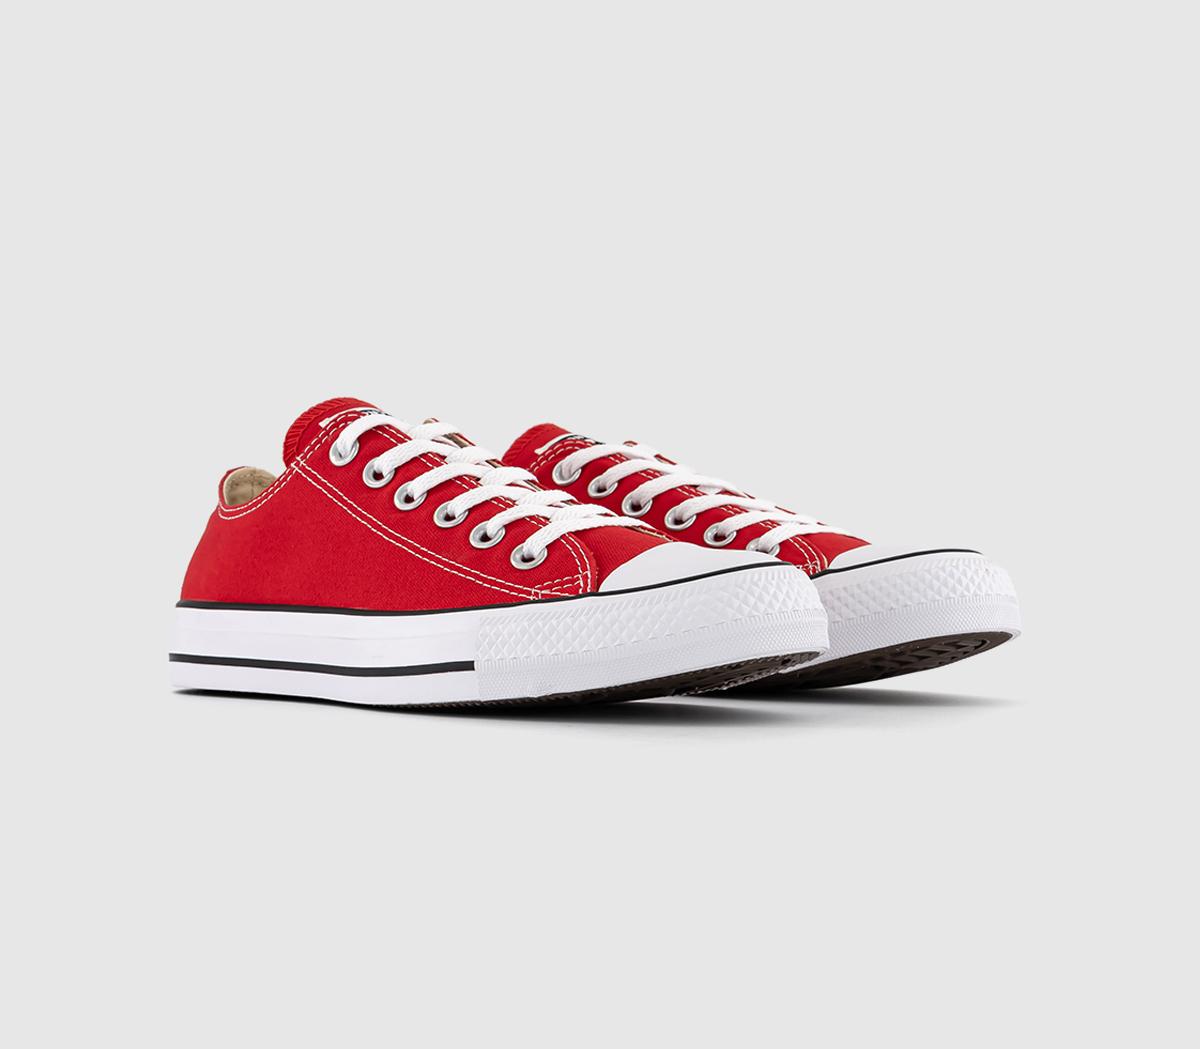 Mens Converse All Star Low Red Canvas Trainers Red/White, 8.5